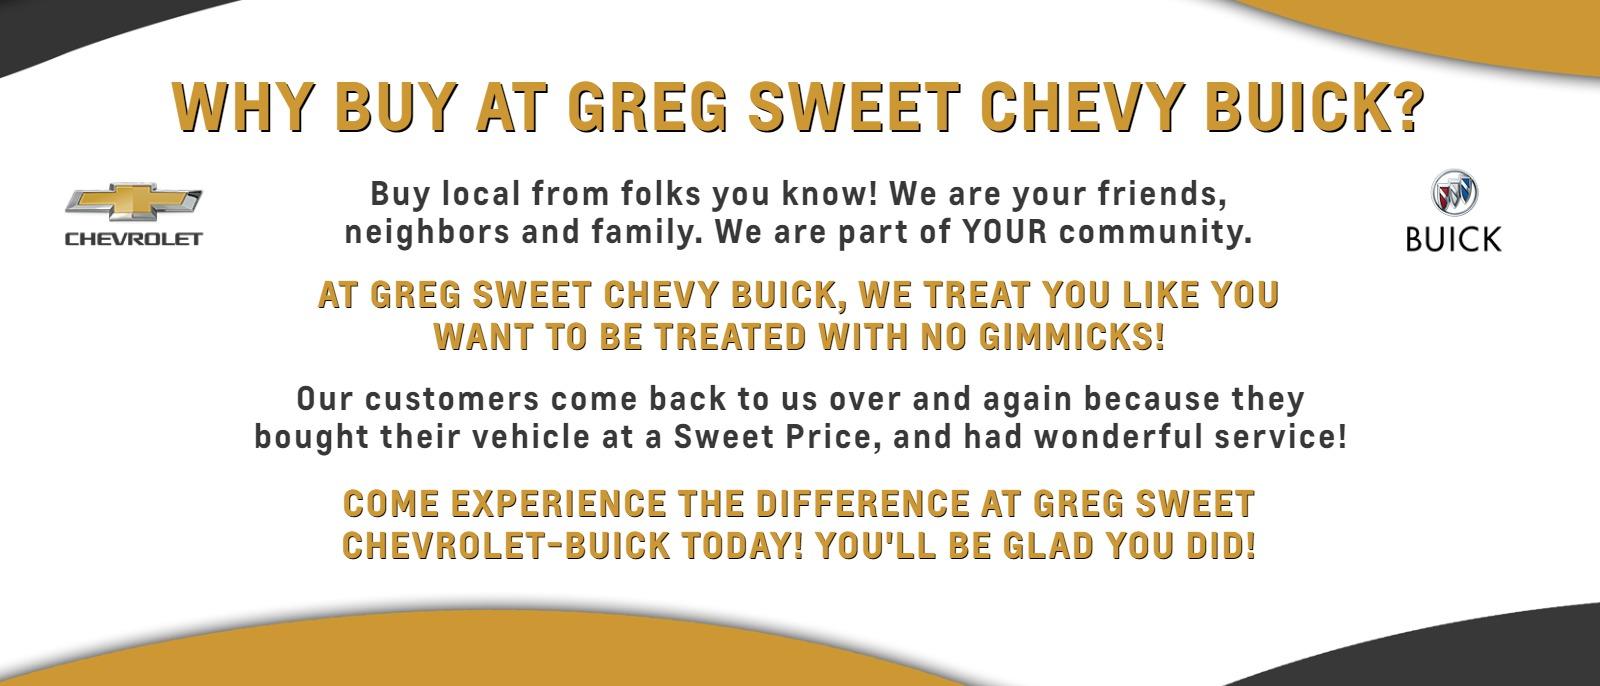 WHY BUY AT GREG SWEET CHEVY BUICK? 
Buy local from folks you know! We are your friends, neighbors and family. We are part of YOUR community. 
AT GREG SWEET CHEVY BUICK, WE TREAT YOU LIKE YOU WANT TO BE TREATED WITH NO GIMMICKS! 
Our customers come back to us over and again because they bought their vehicle at a Sweet Price, and had wonderful service!
 COME EXPERIENCE THE DIFFERENCE AT GREG SWEET CHEVROLET-BUICK TODAY! YOU'LL BE GLAD YOU DID!